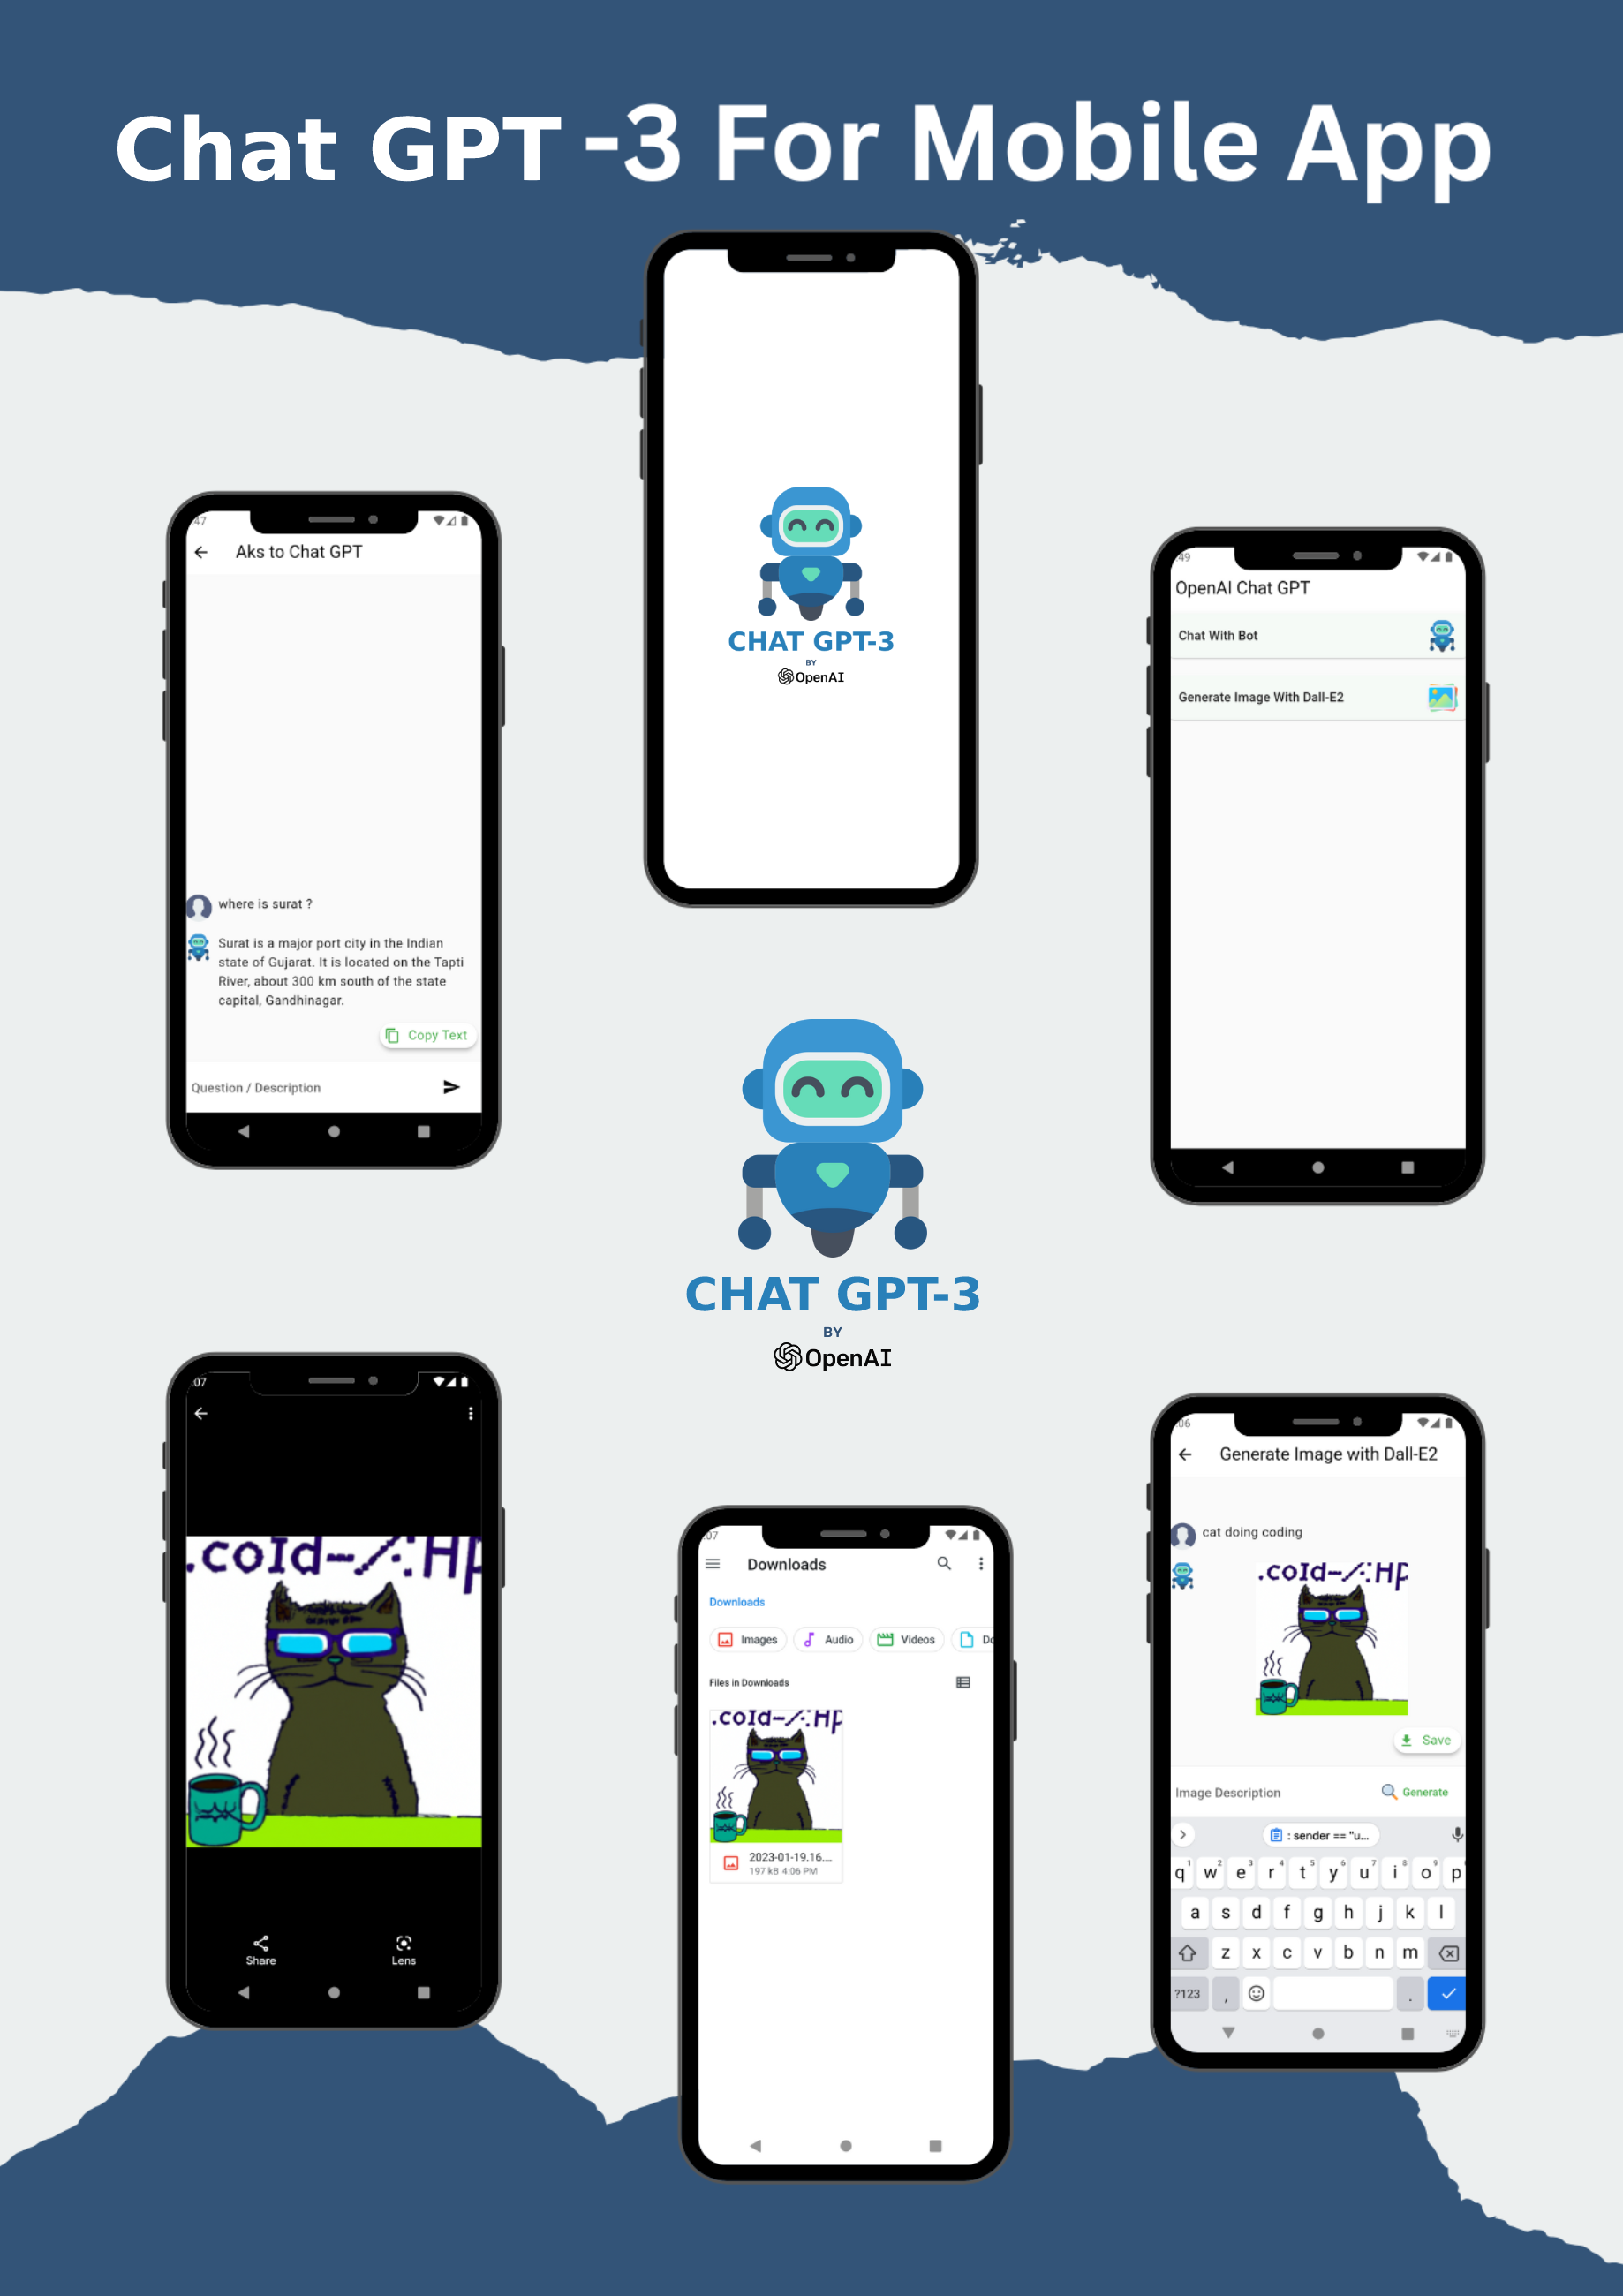 Flutter ChatGPT Moblie App for Android and IOS with Text Chat and Image Generation - 2